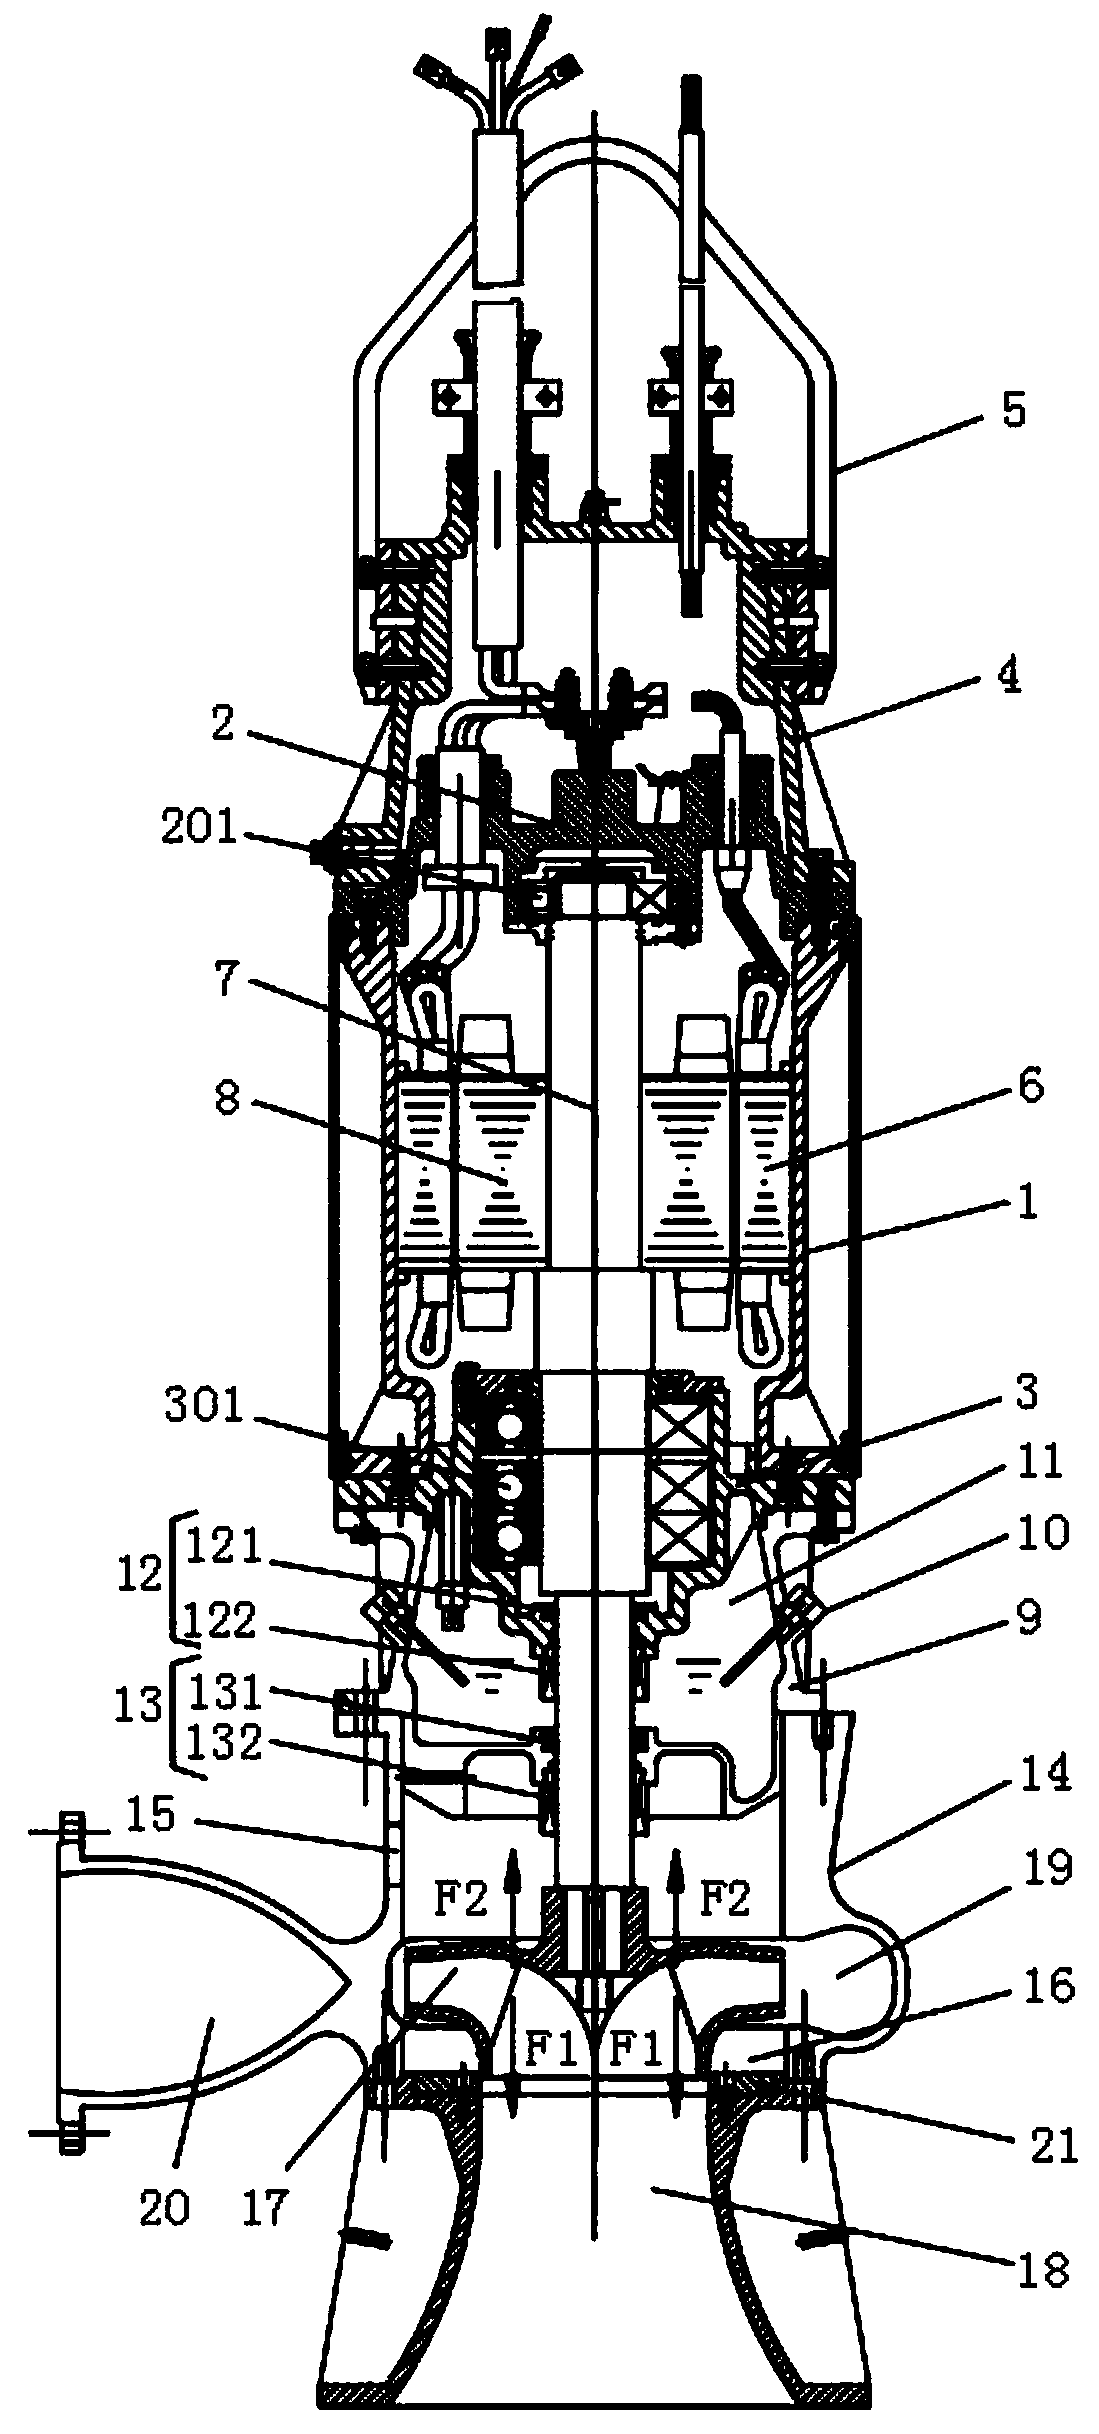 Double sucking type submersible pump